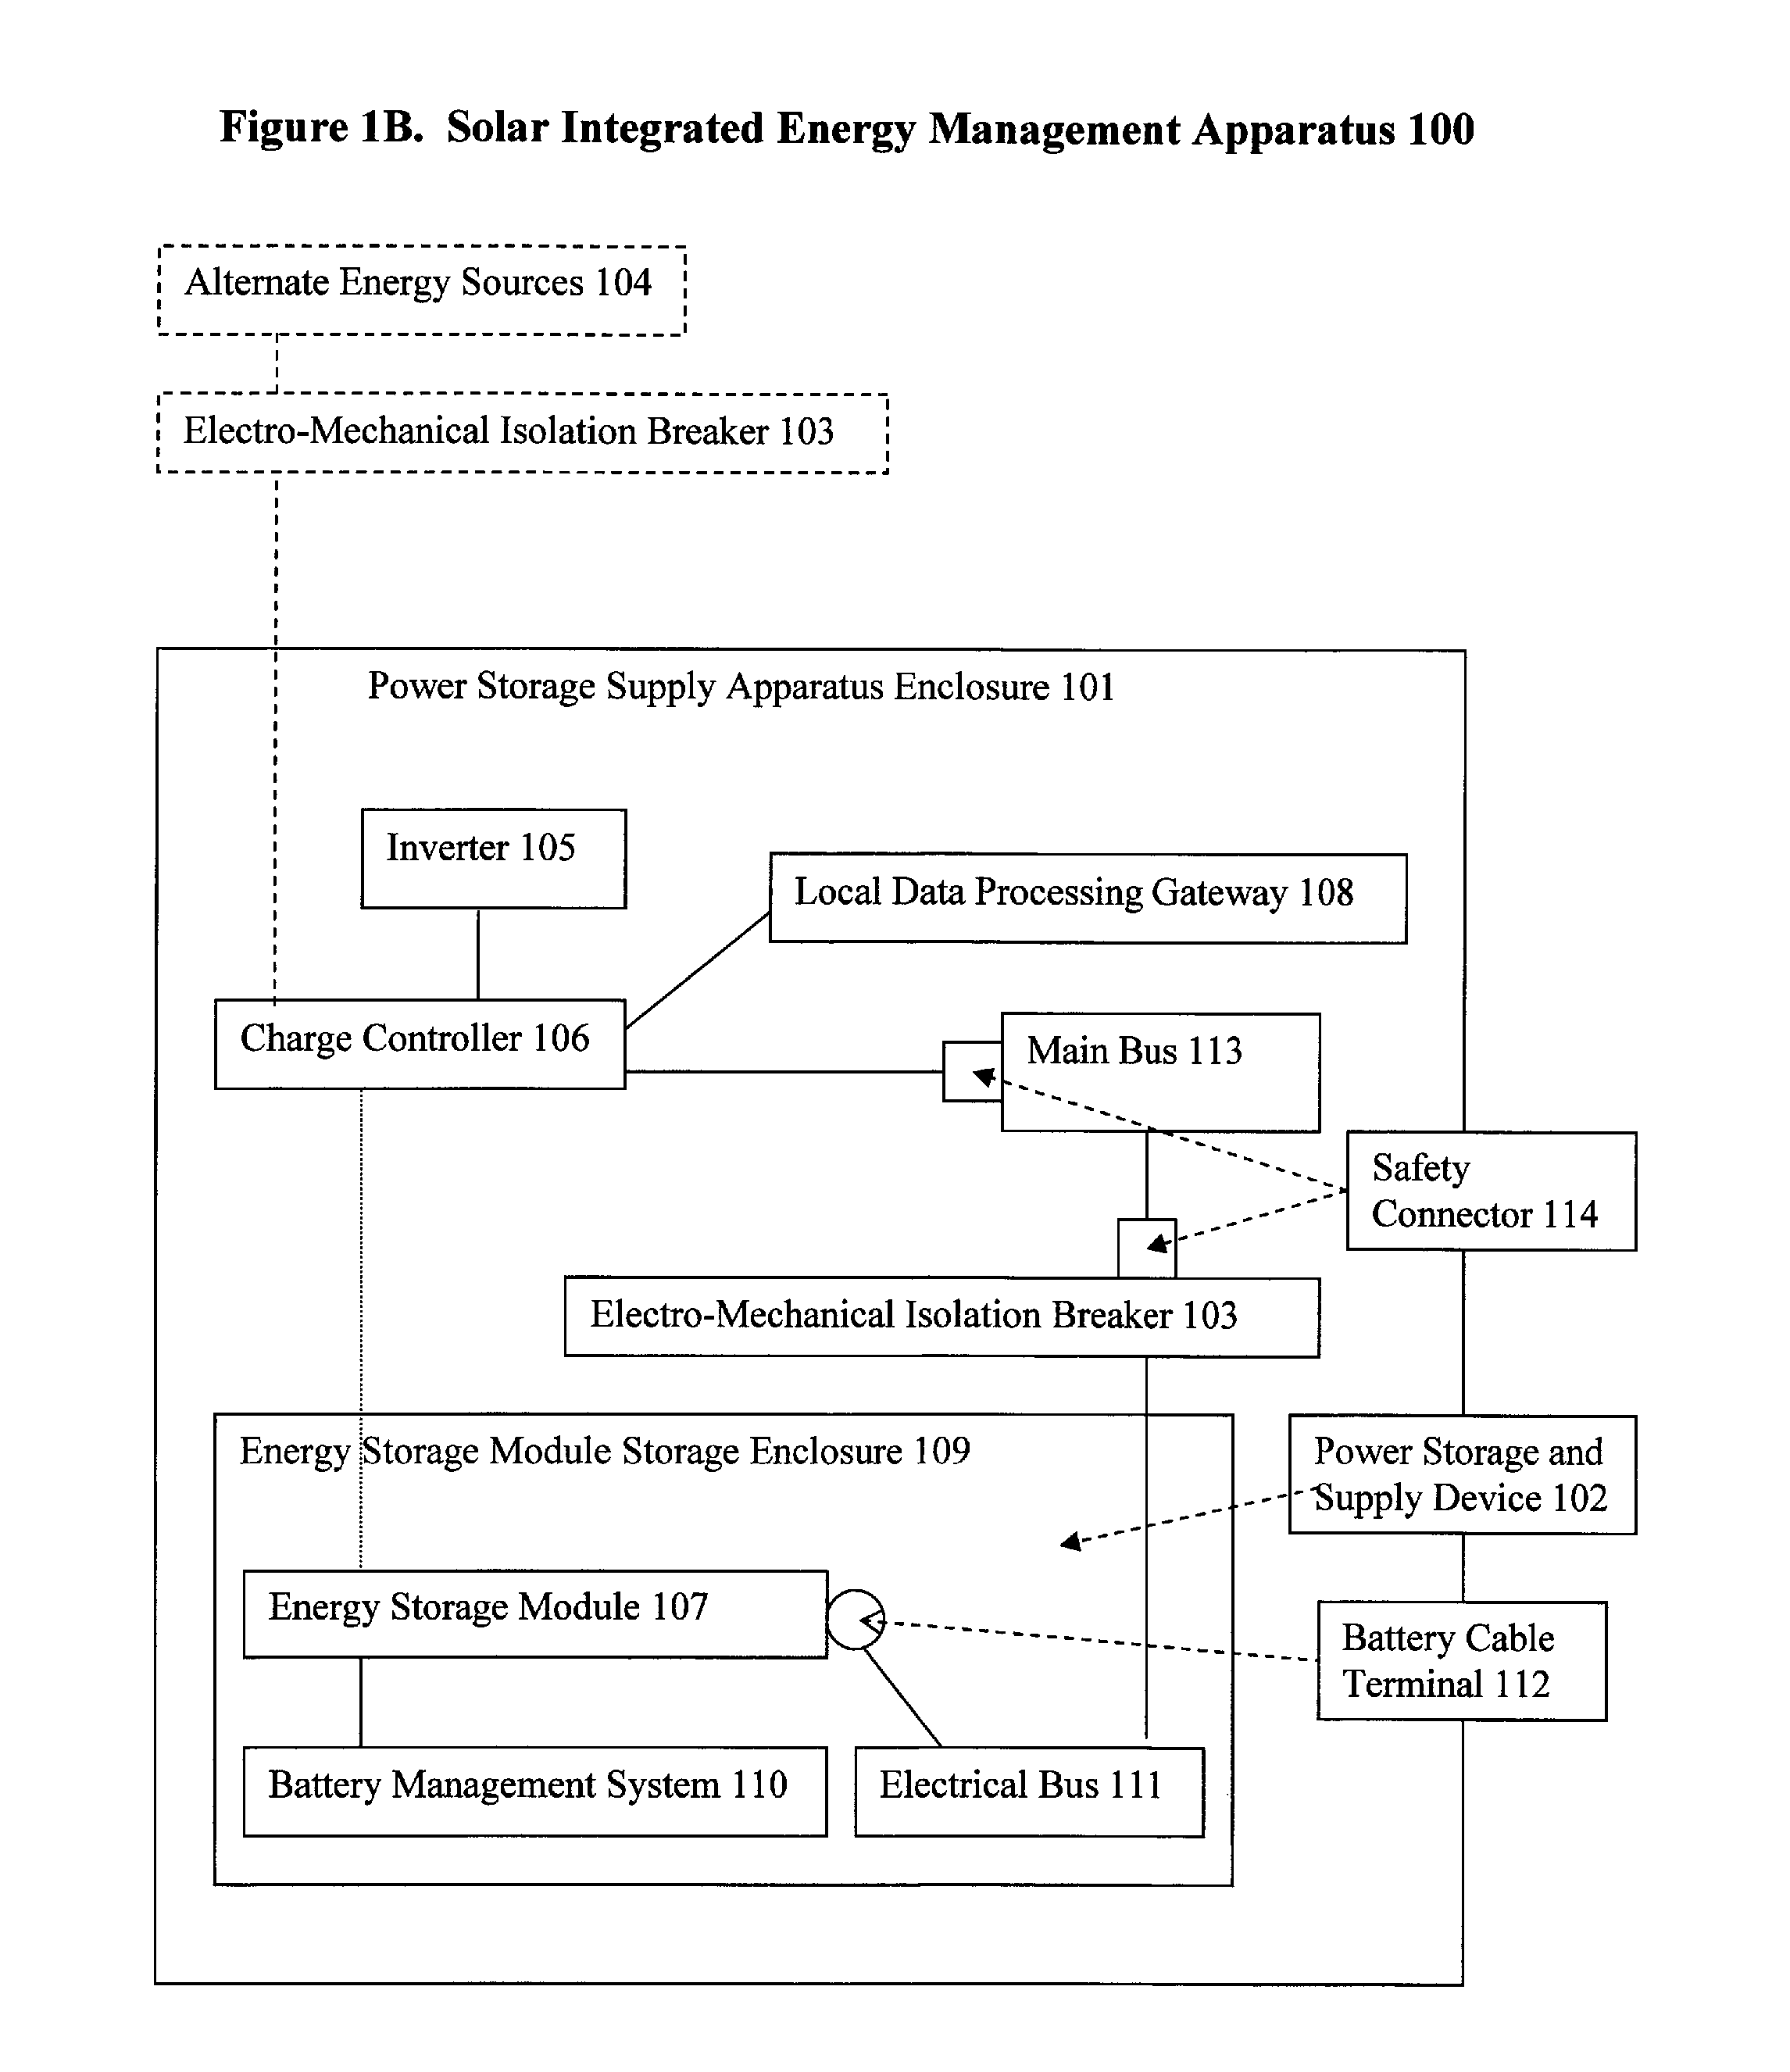 Systems, apparatus, and methods of a solar energy grid integrated system with energy storage appliance